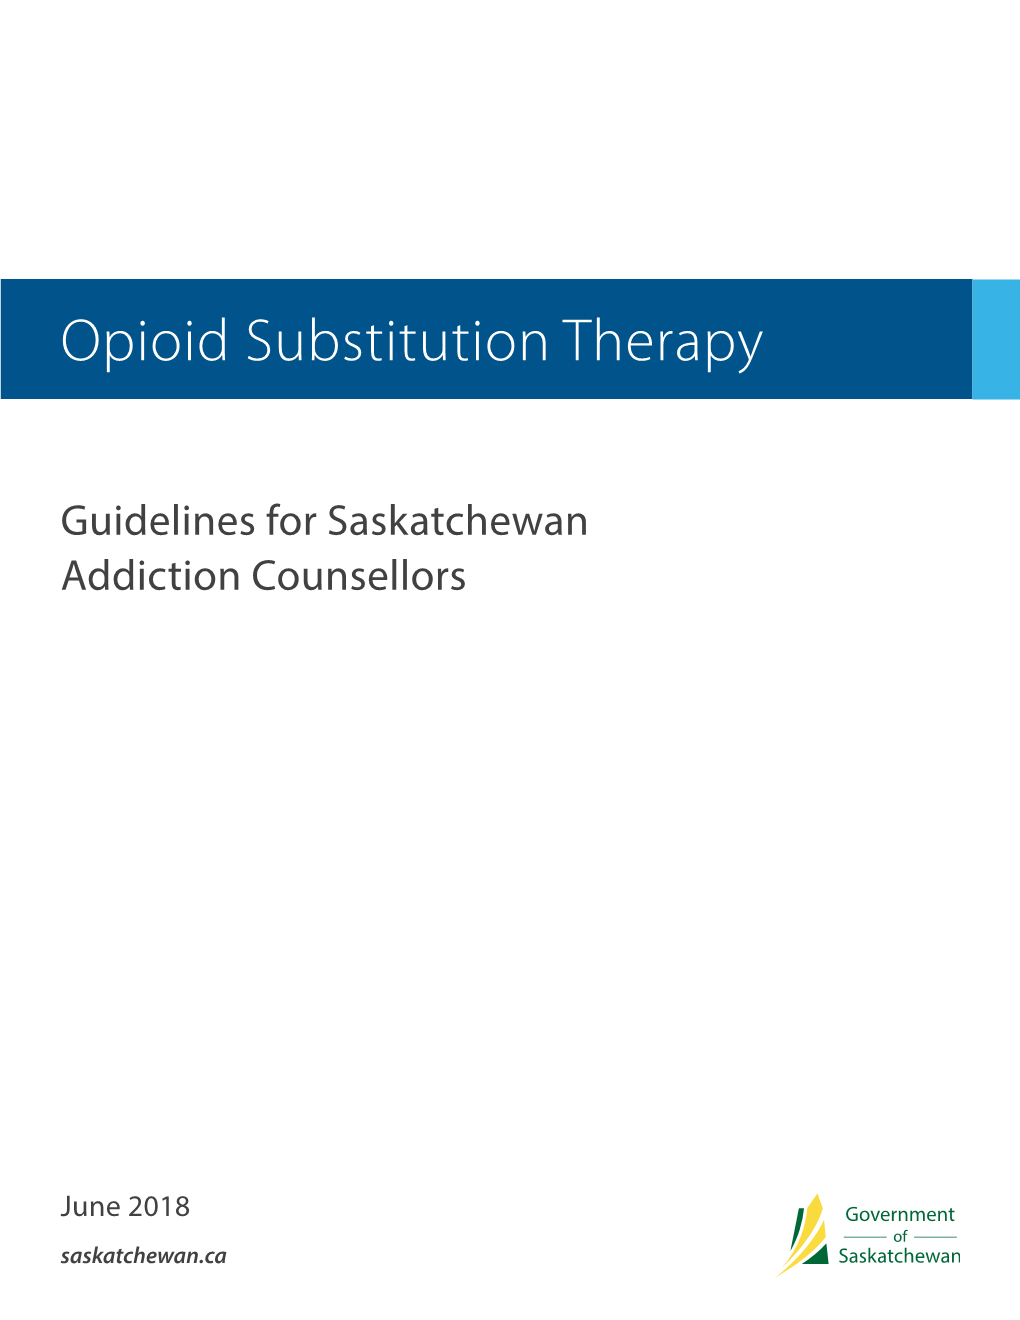 Opioid Substitution Therapy Guidelines